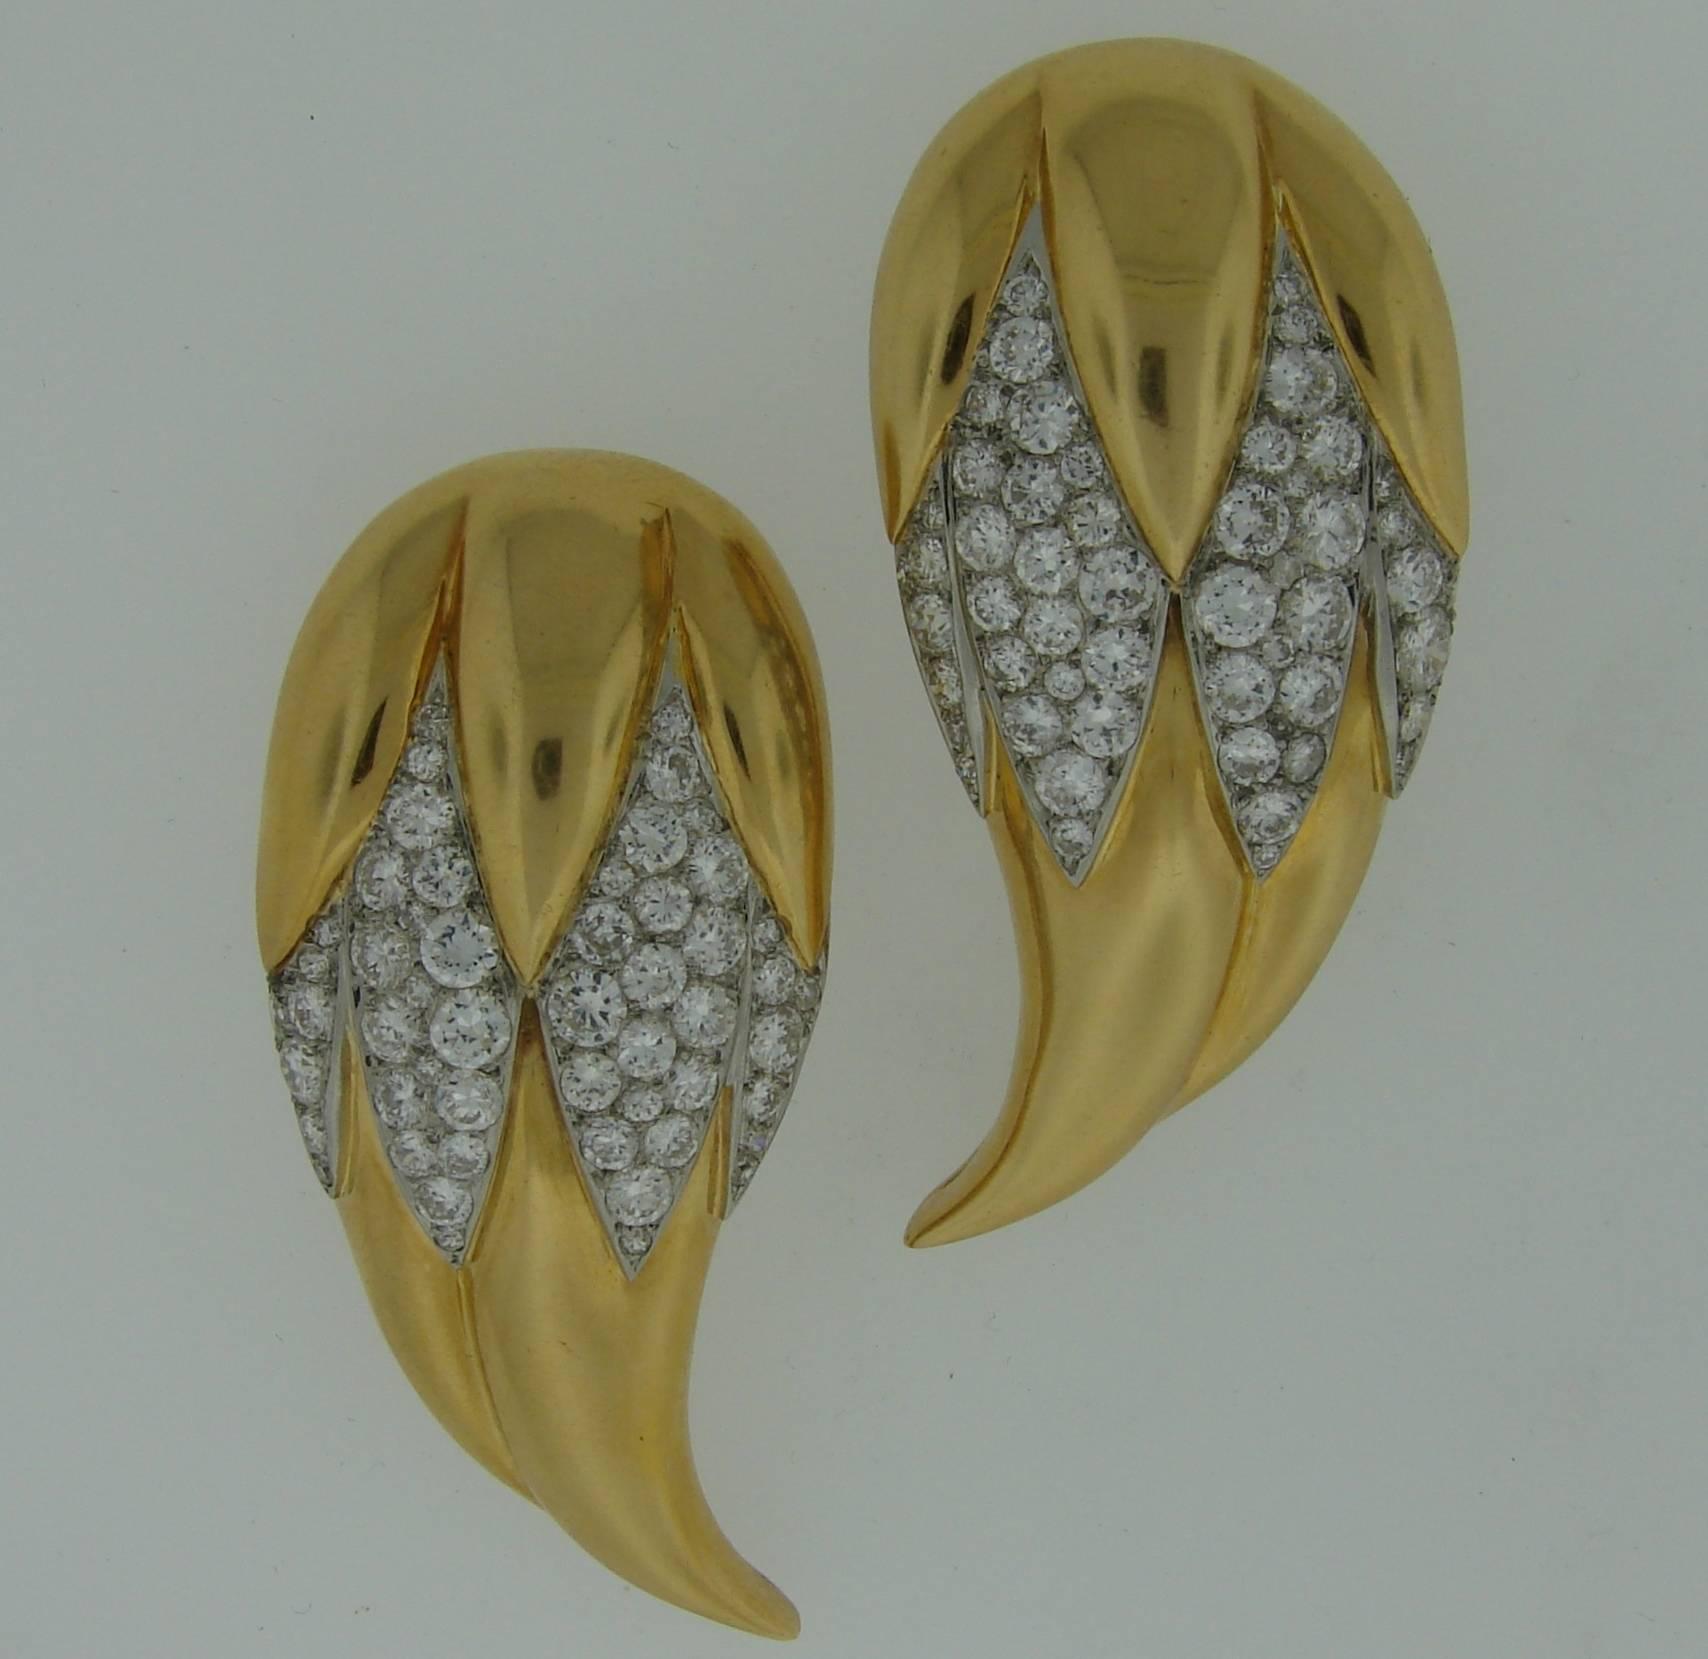 A pair of magnificent double clips designed by Suzanne Belperron and manufactured by company B. Herz in Paris between 1932 and 1940. The piece comes with an authentication certificate from Belperron LLC (see picture 10). 
The brooches are made of